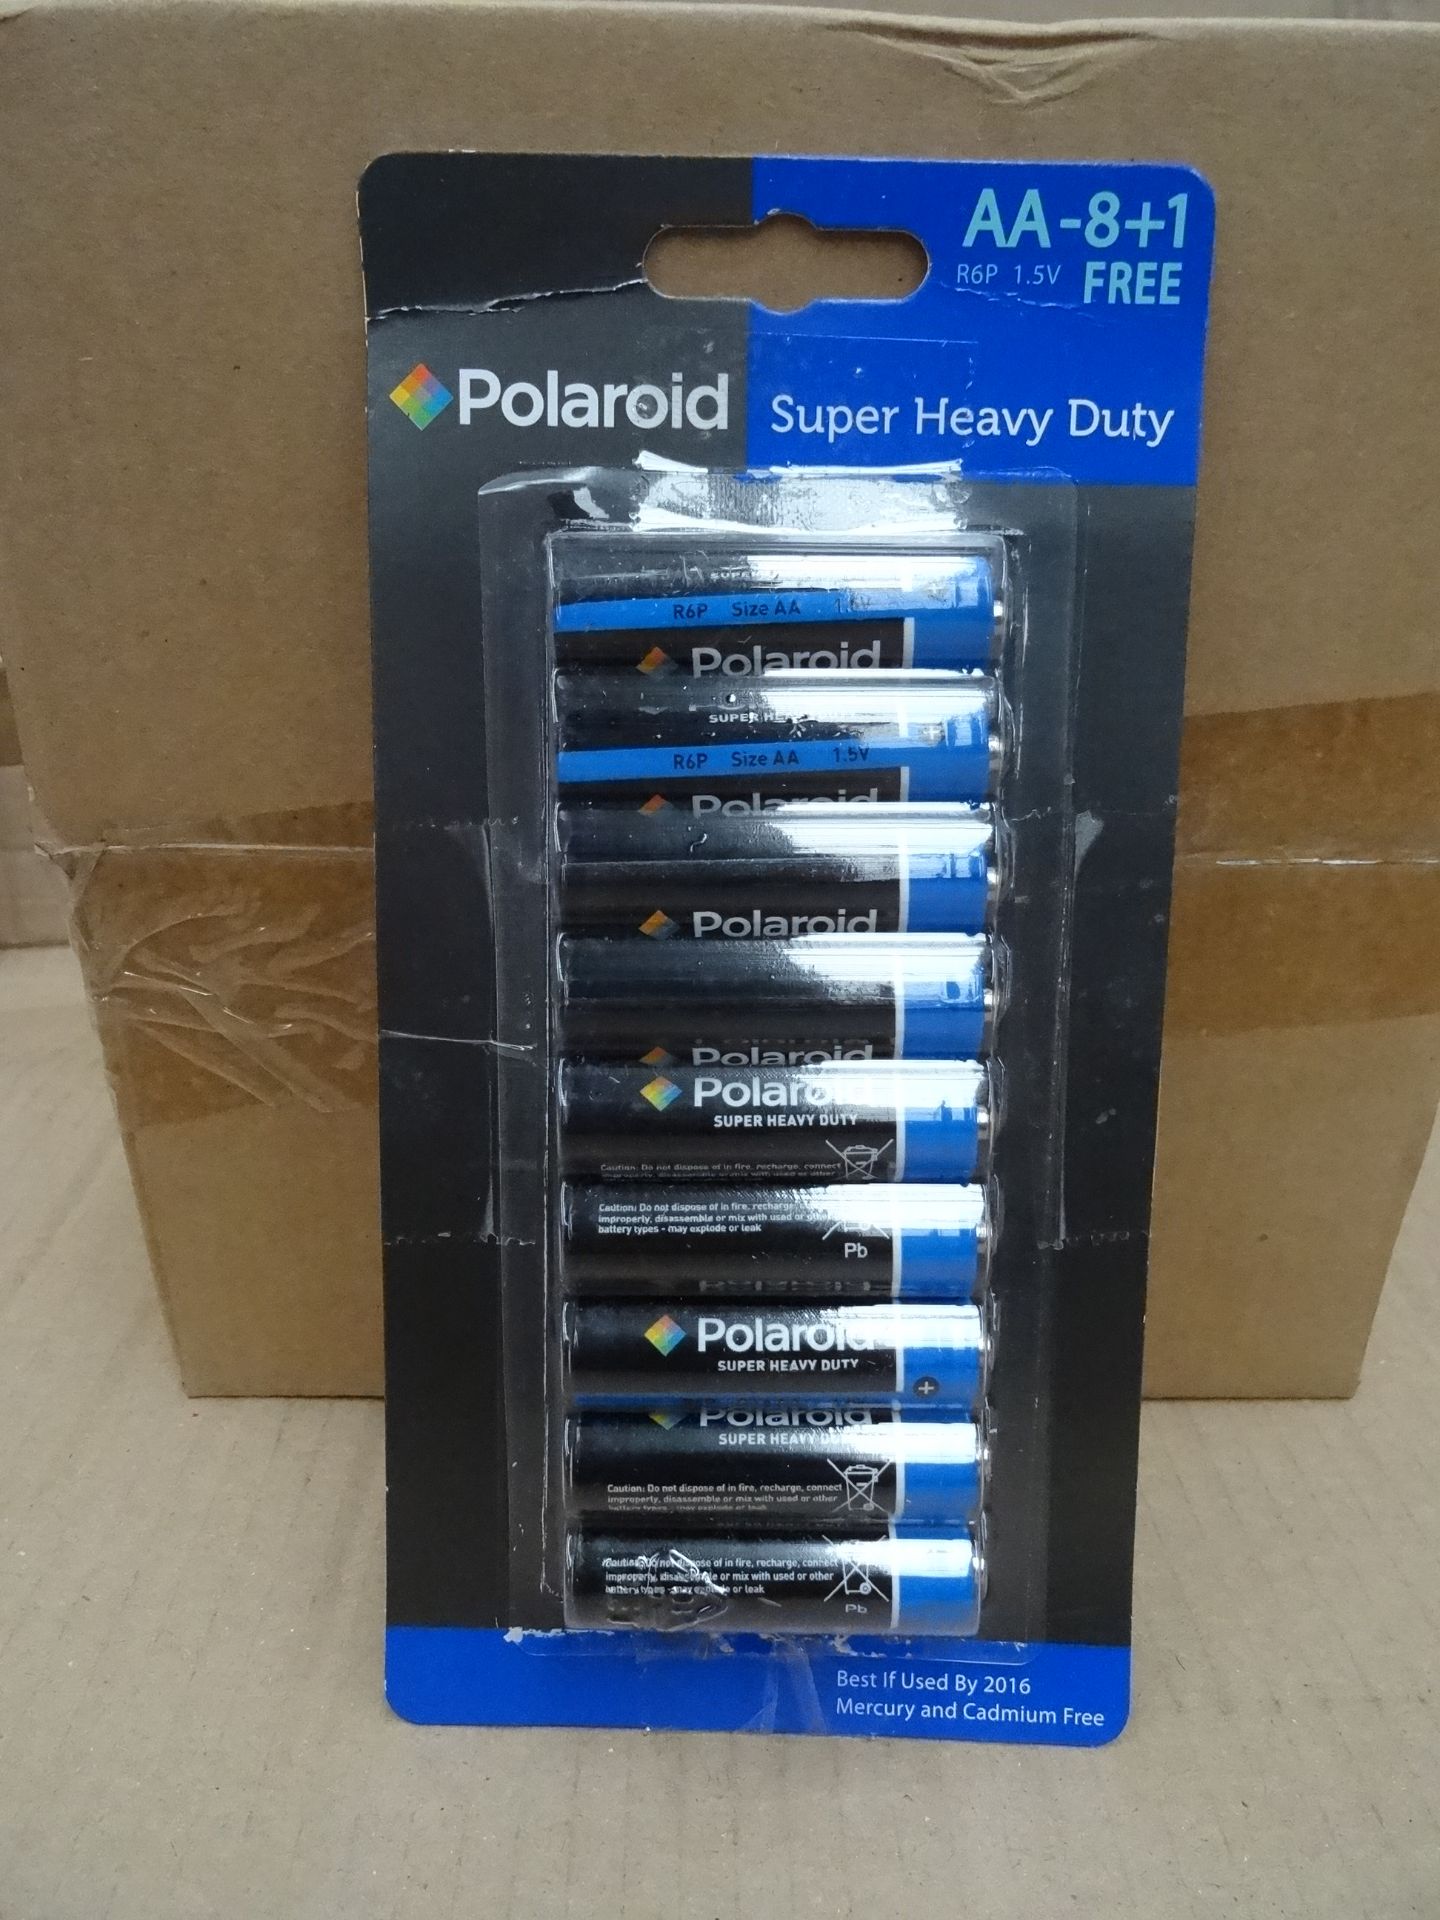 36 x Packs of 9 Polaroid Super Heavy Duty AA Size Batteries. Brand new and Boxed! Dated Until